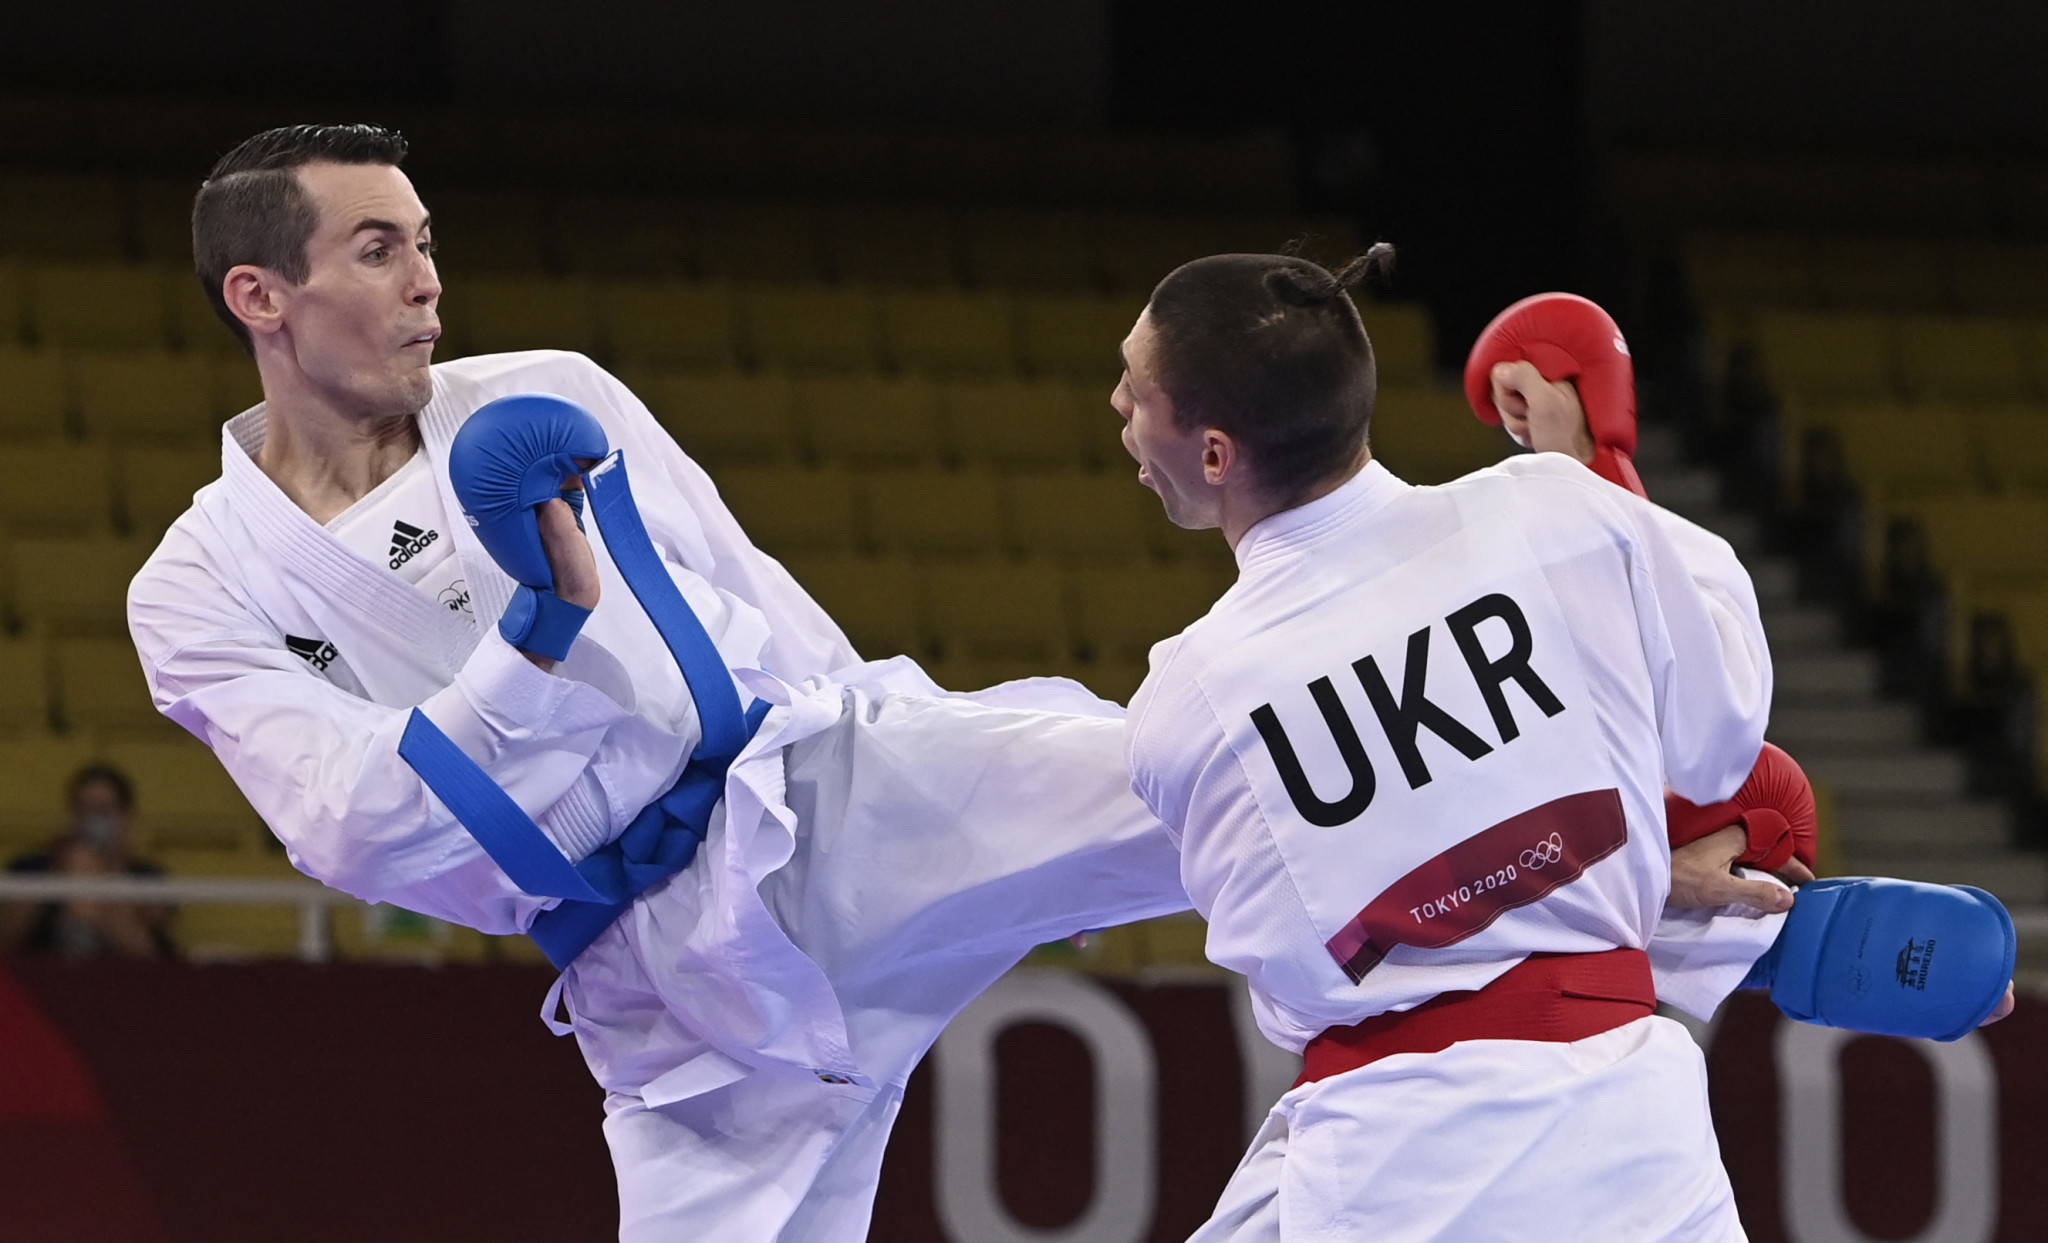 Curaçao ready to host Pan American Karate Championships